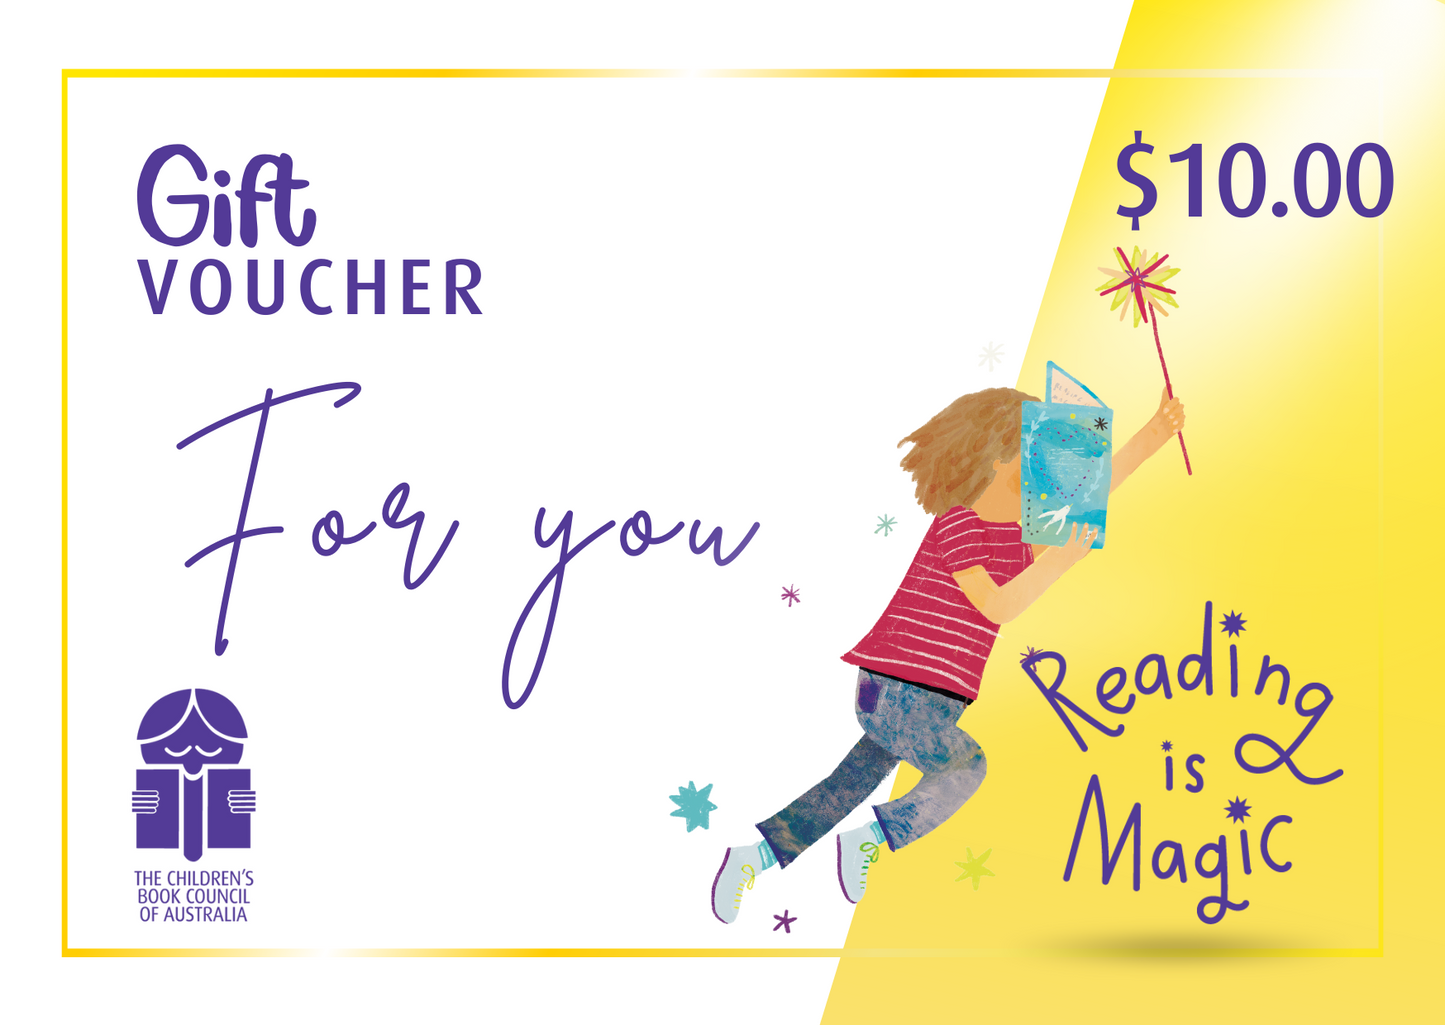 An image of a 10 dollar gift voucher, with the CBCA logo in the lower left corner and an illustration of a child in profile reading from a book being held in one hand and a wand upwards in the other arm.